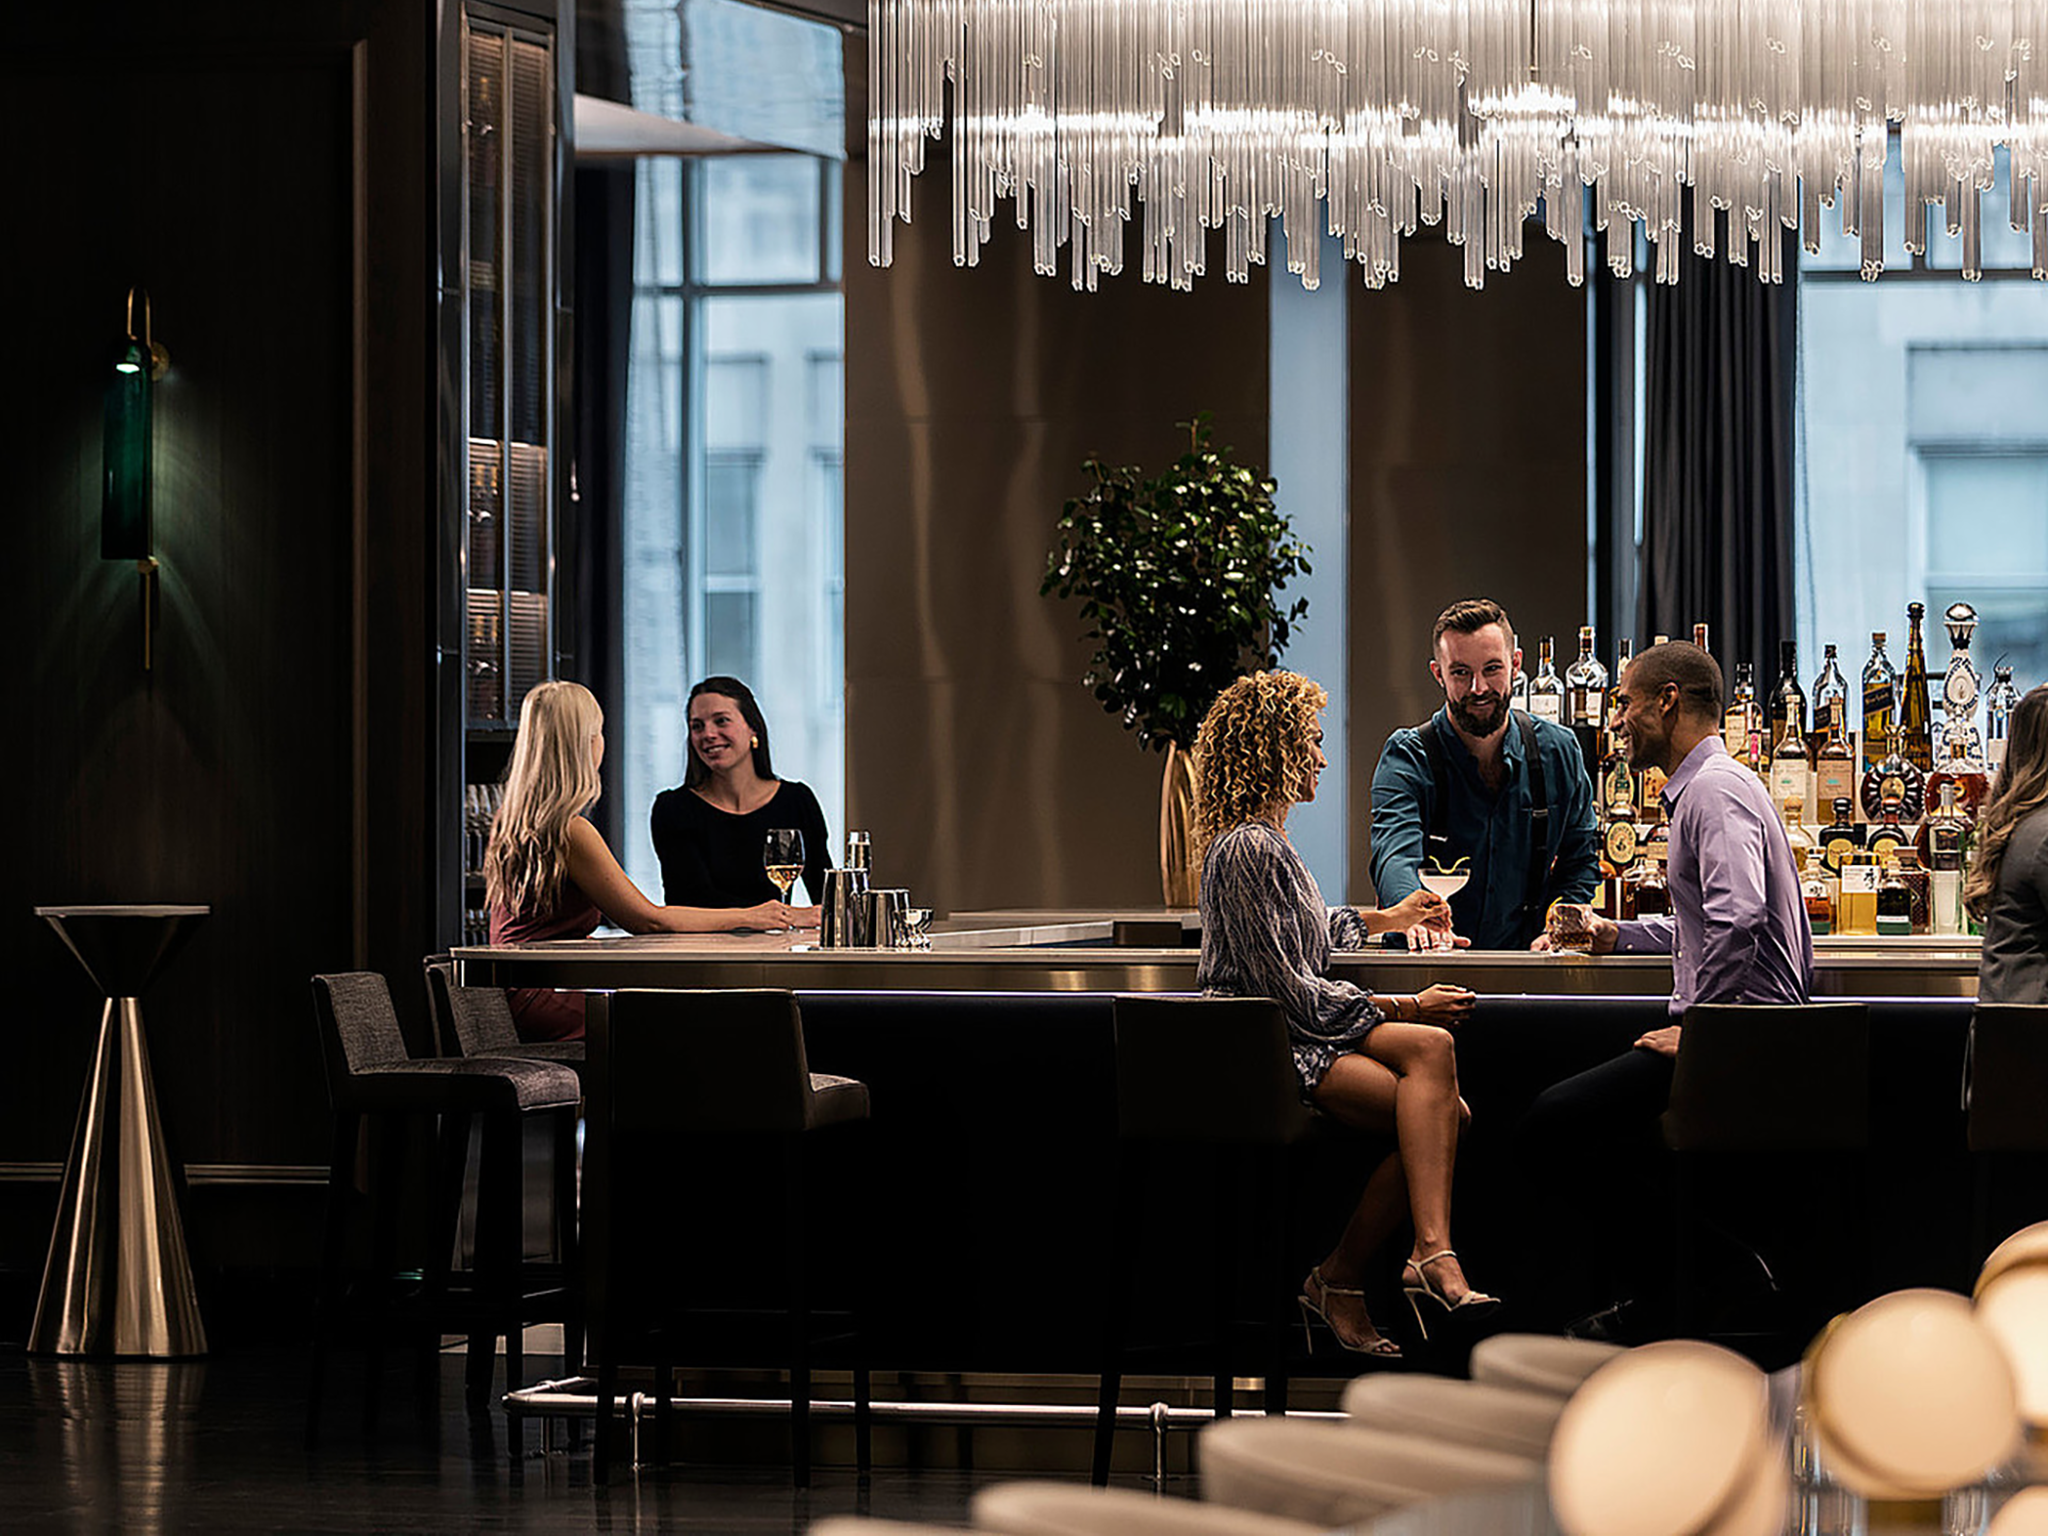 Adorn Bar & Restaurant, located on the seventh floor, has spectacular views of the city